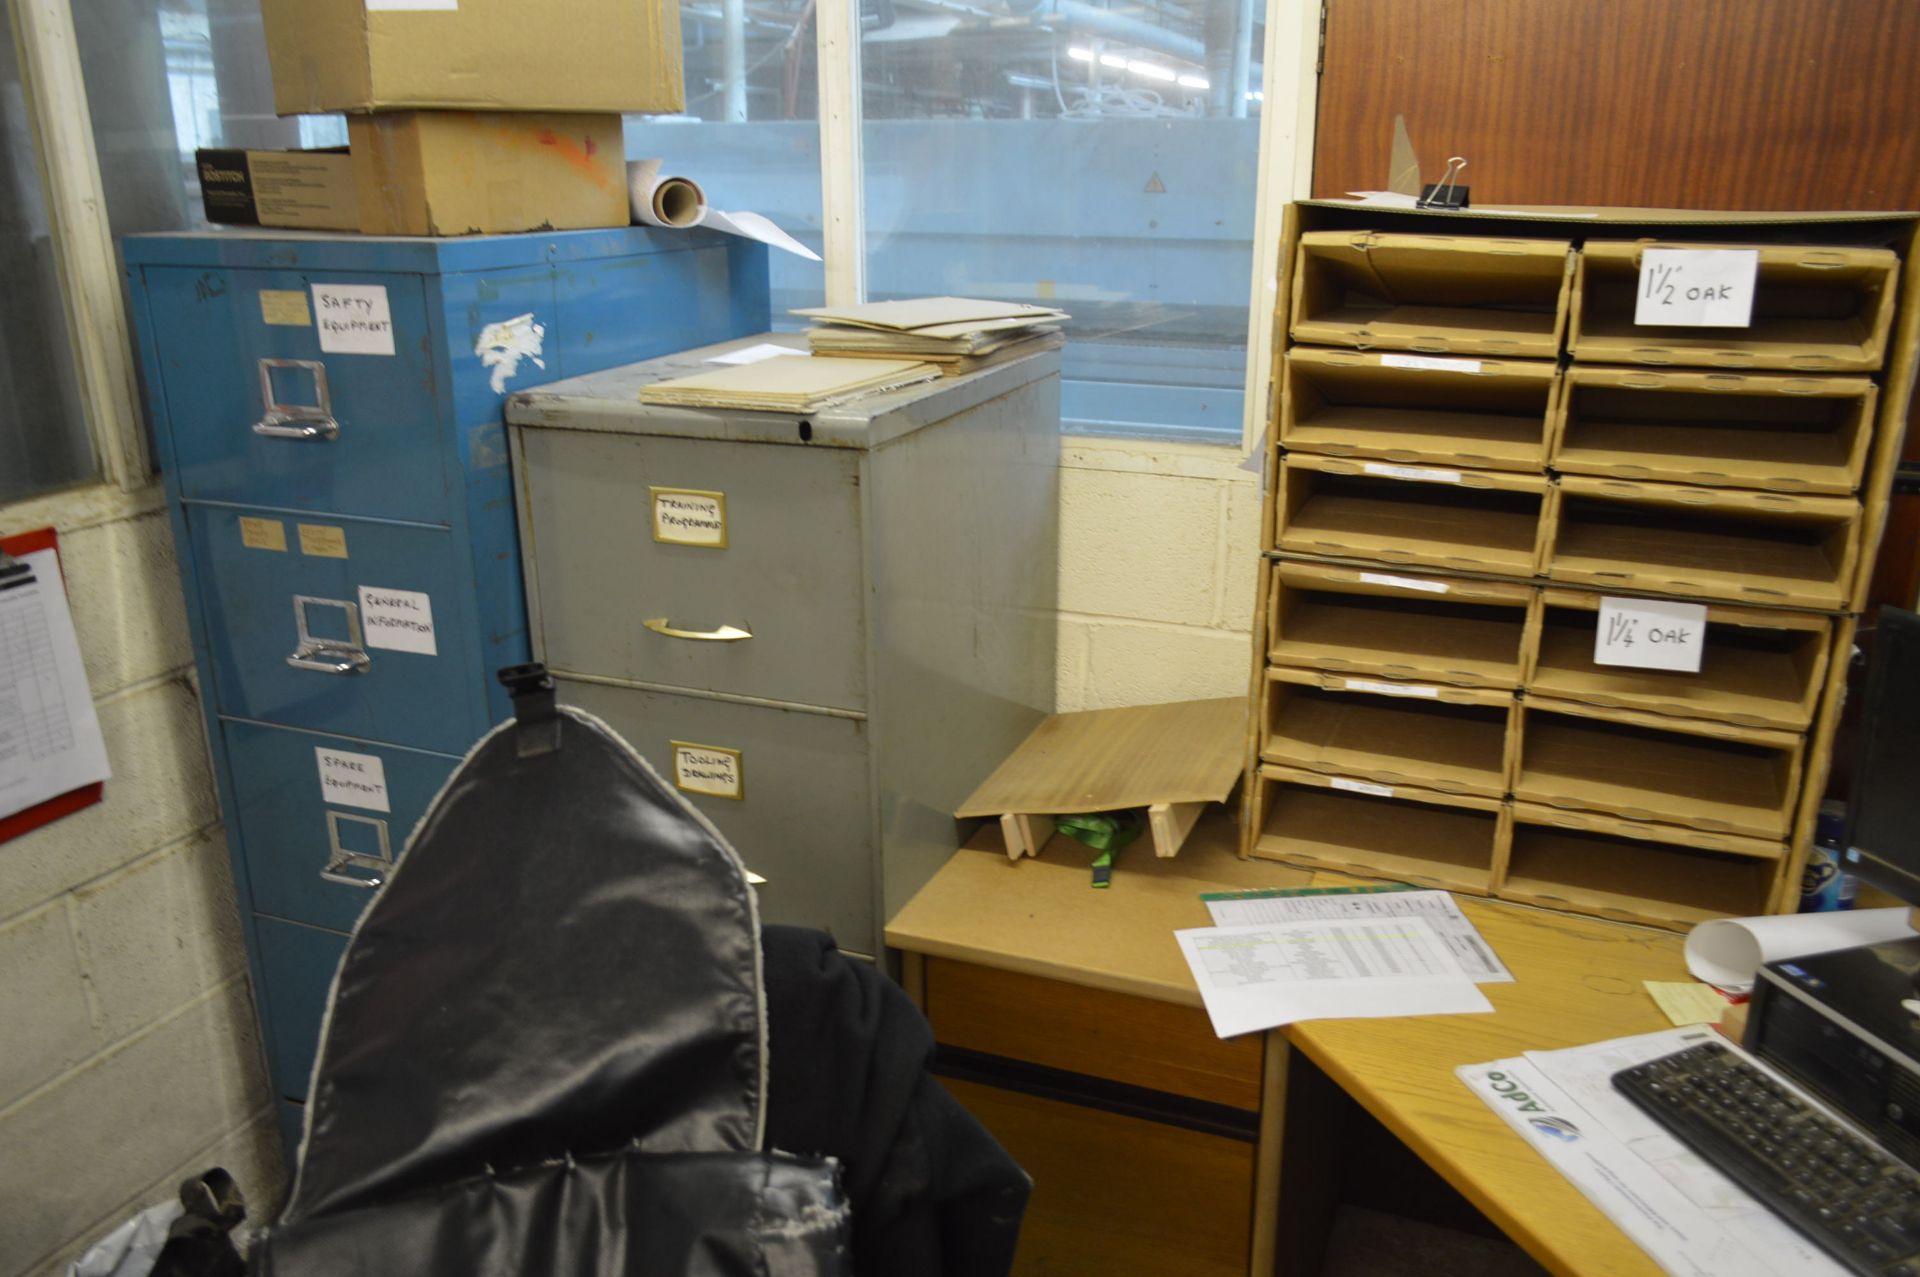 Residual Loose Contents of Office, including 2 filing cabinets, chairs and heater, (excluding